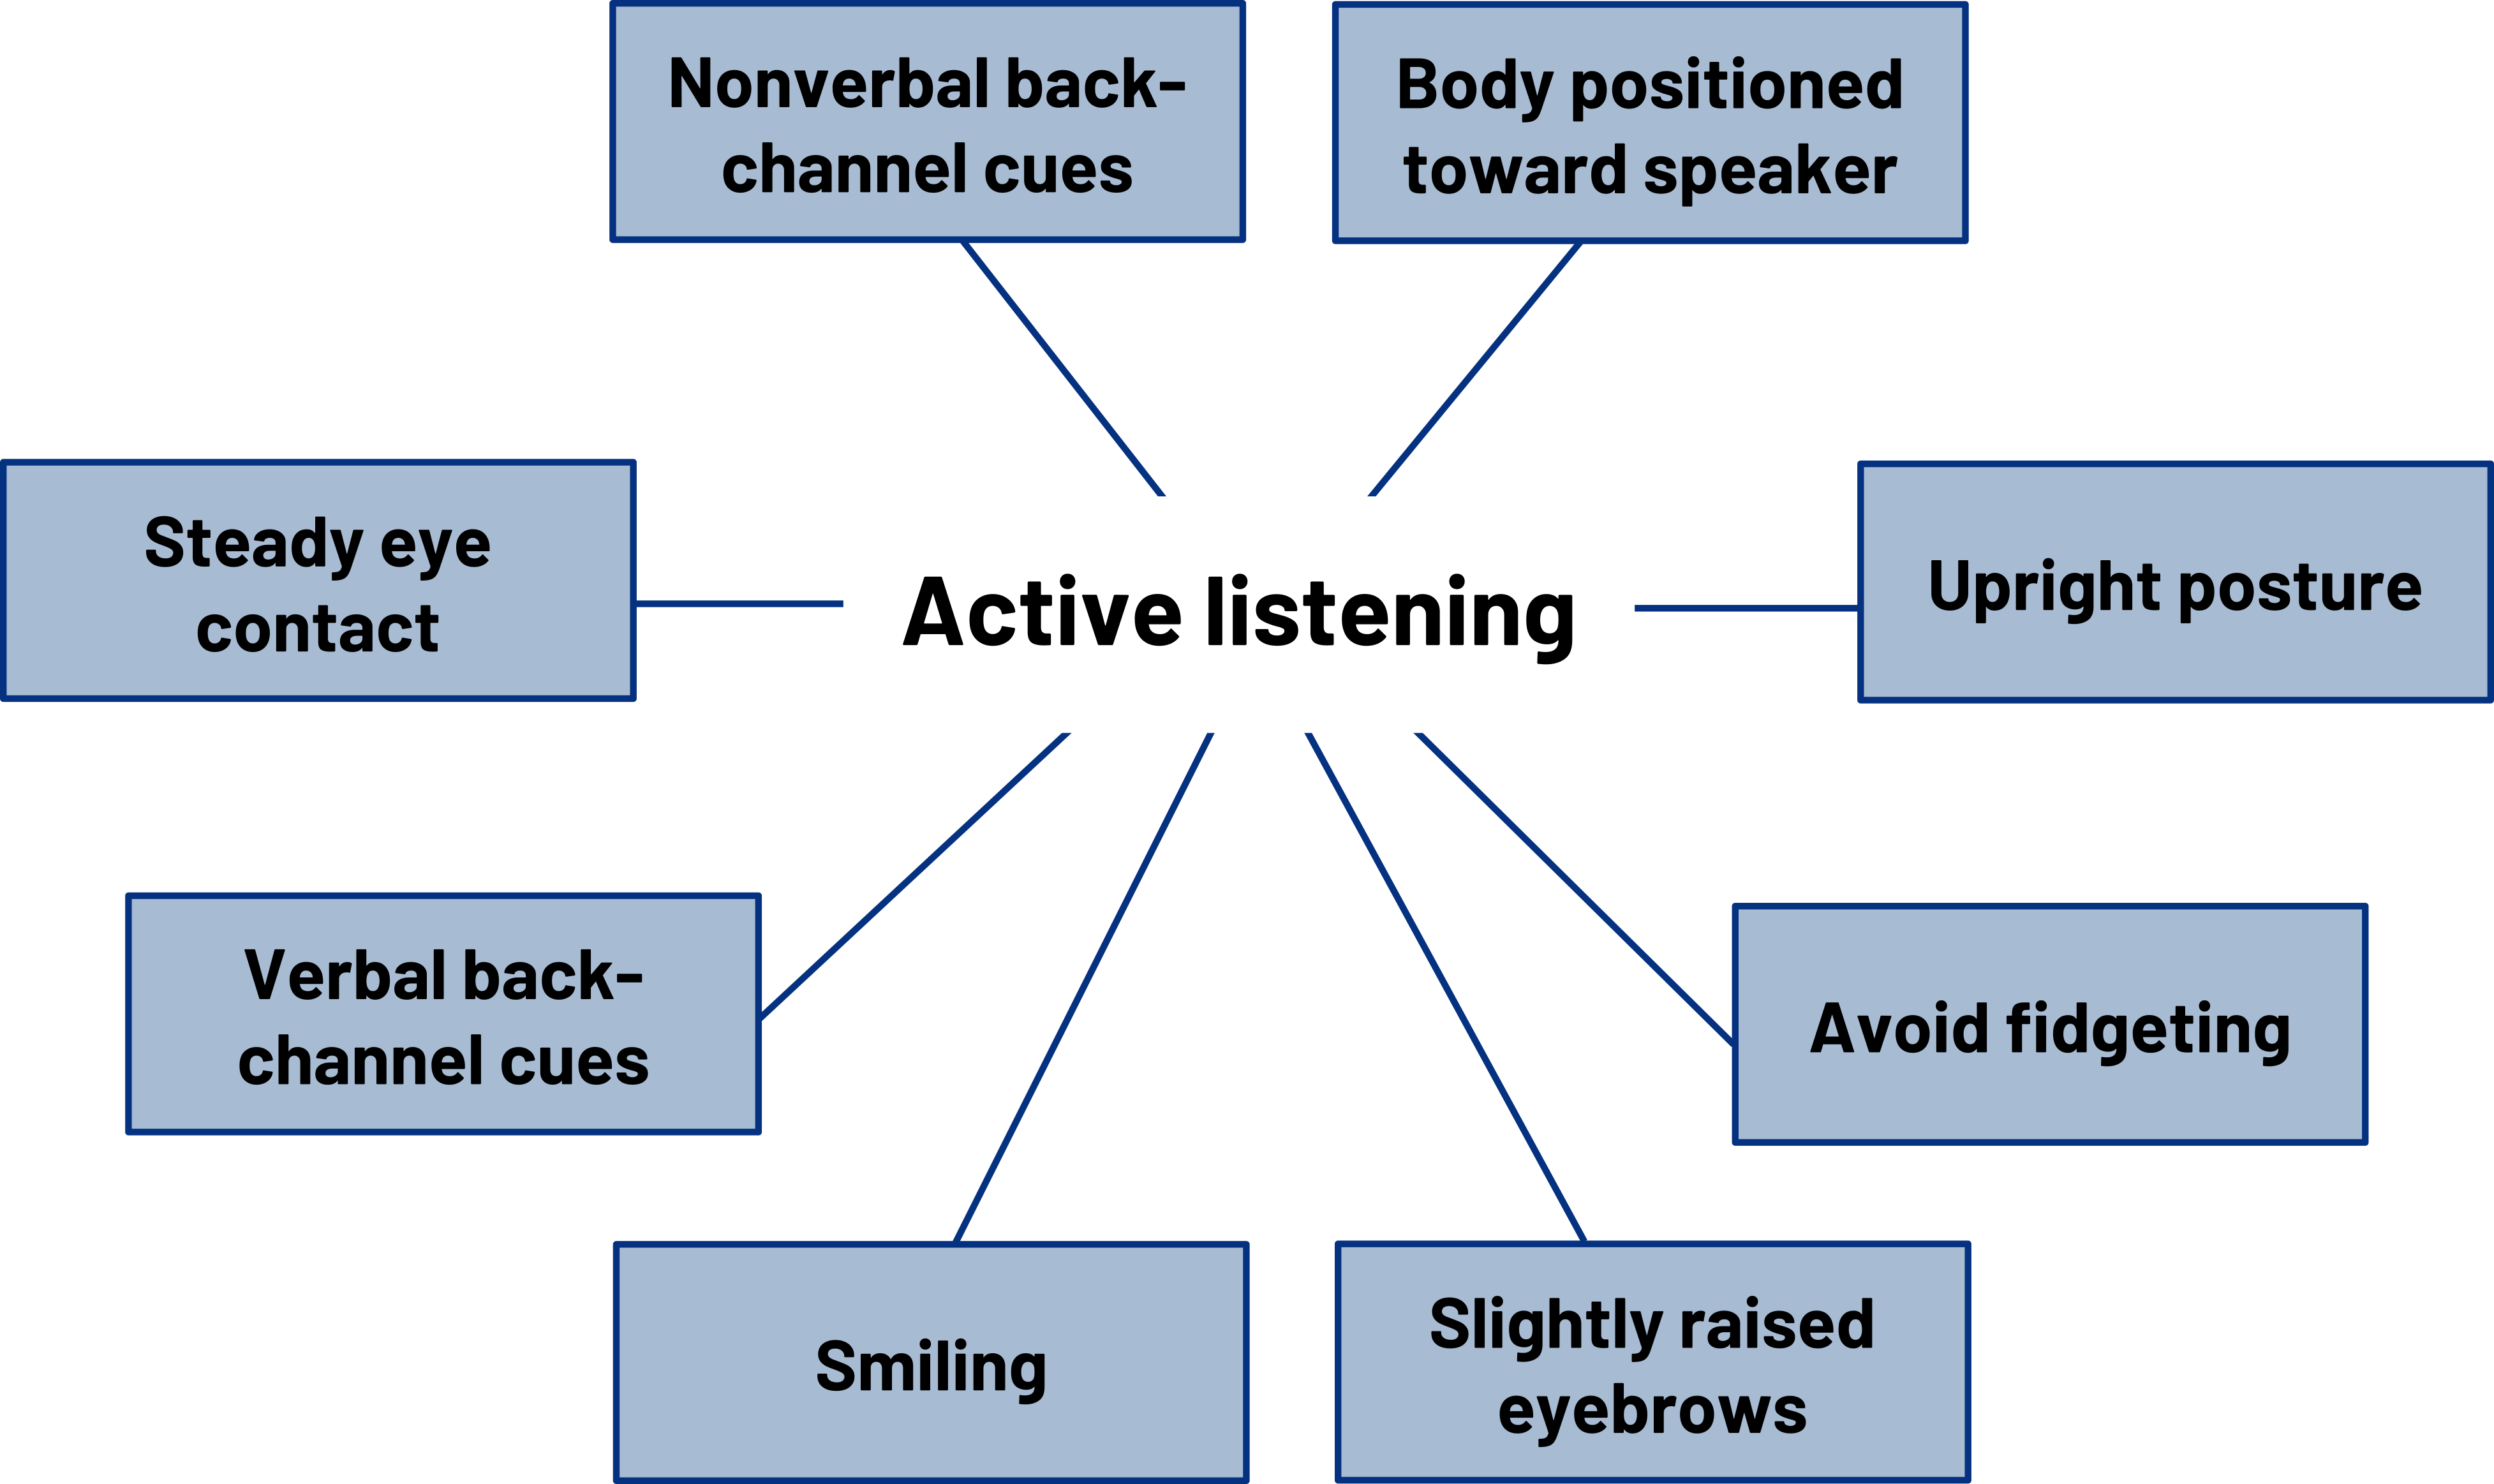 Active listening: Nonverbal back-channel cues, body positioned toward speaker, upright posture, avoid fidgeting, slightly raised eyebrows, smiling, verbal back-channel cues, steady eye contact